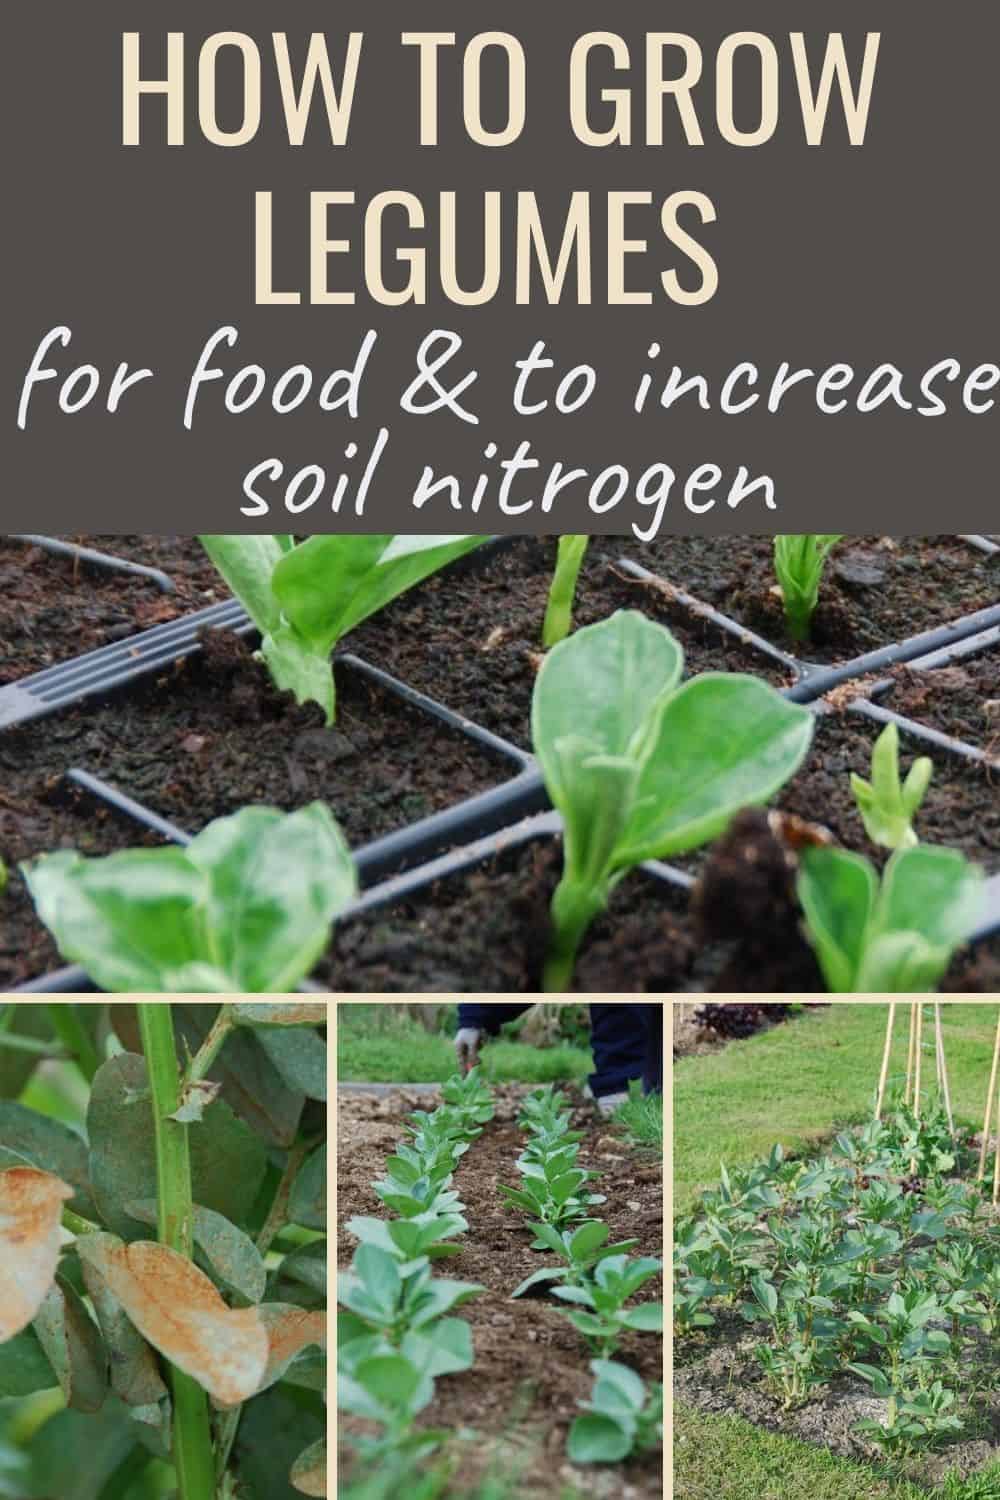 How to grow legumes for food and to increse soil nitrogen